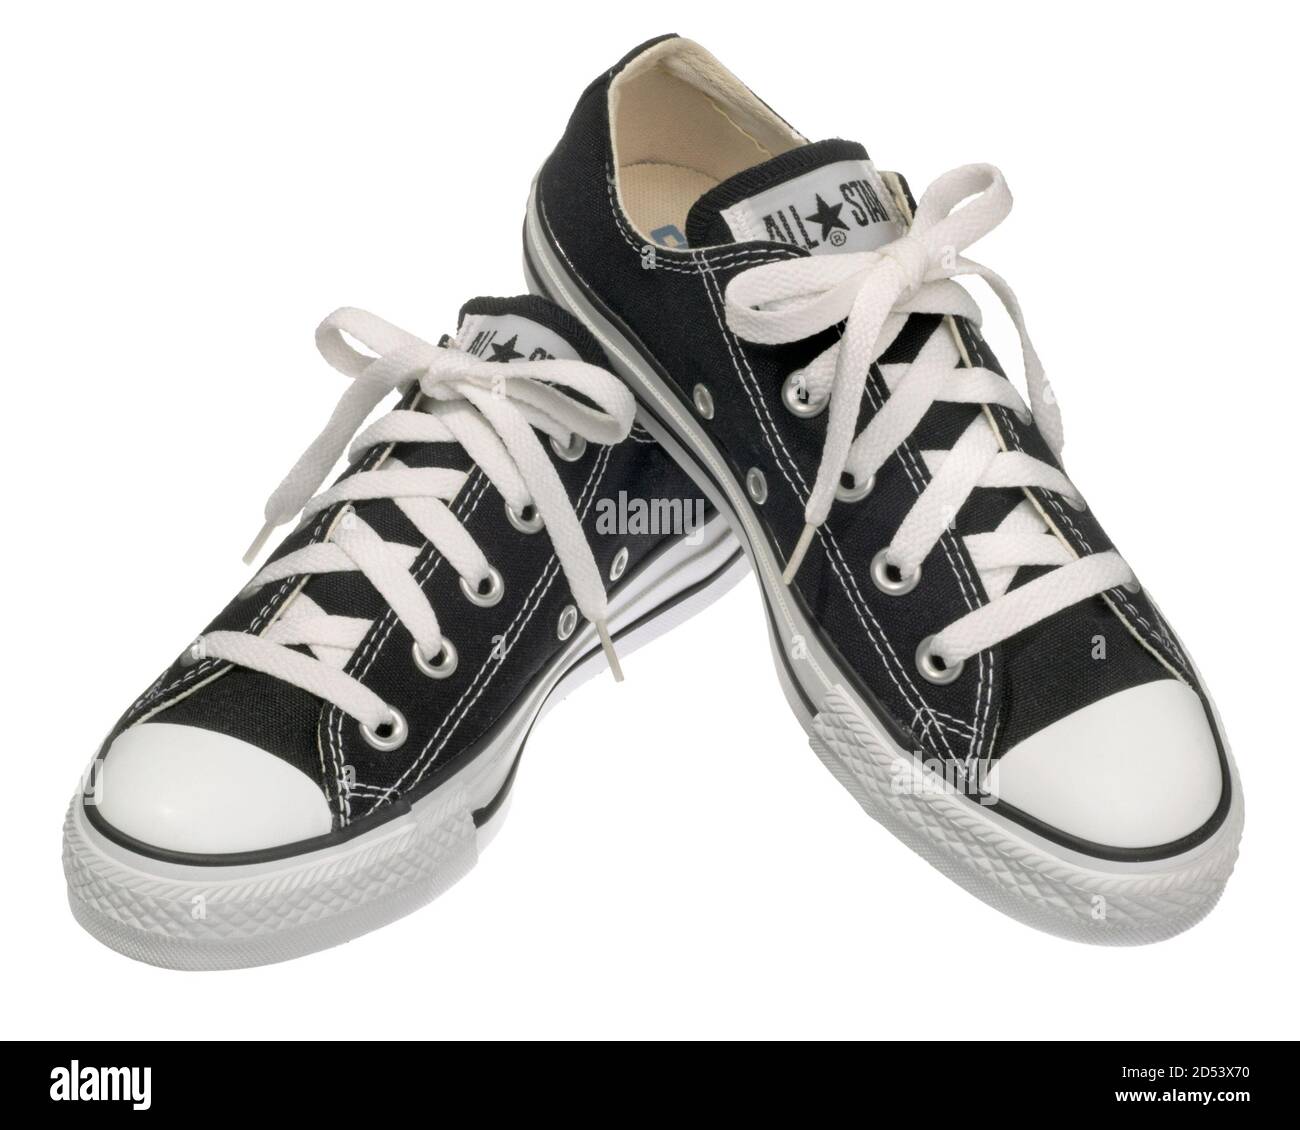 Pair of converse all star shoes photographed on a white background Stock  Photo - Alamy